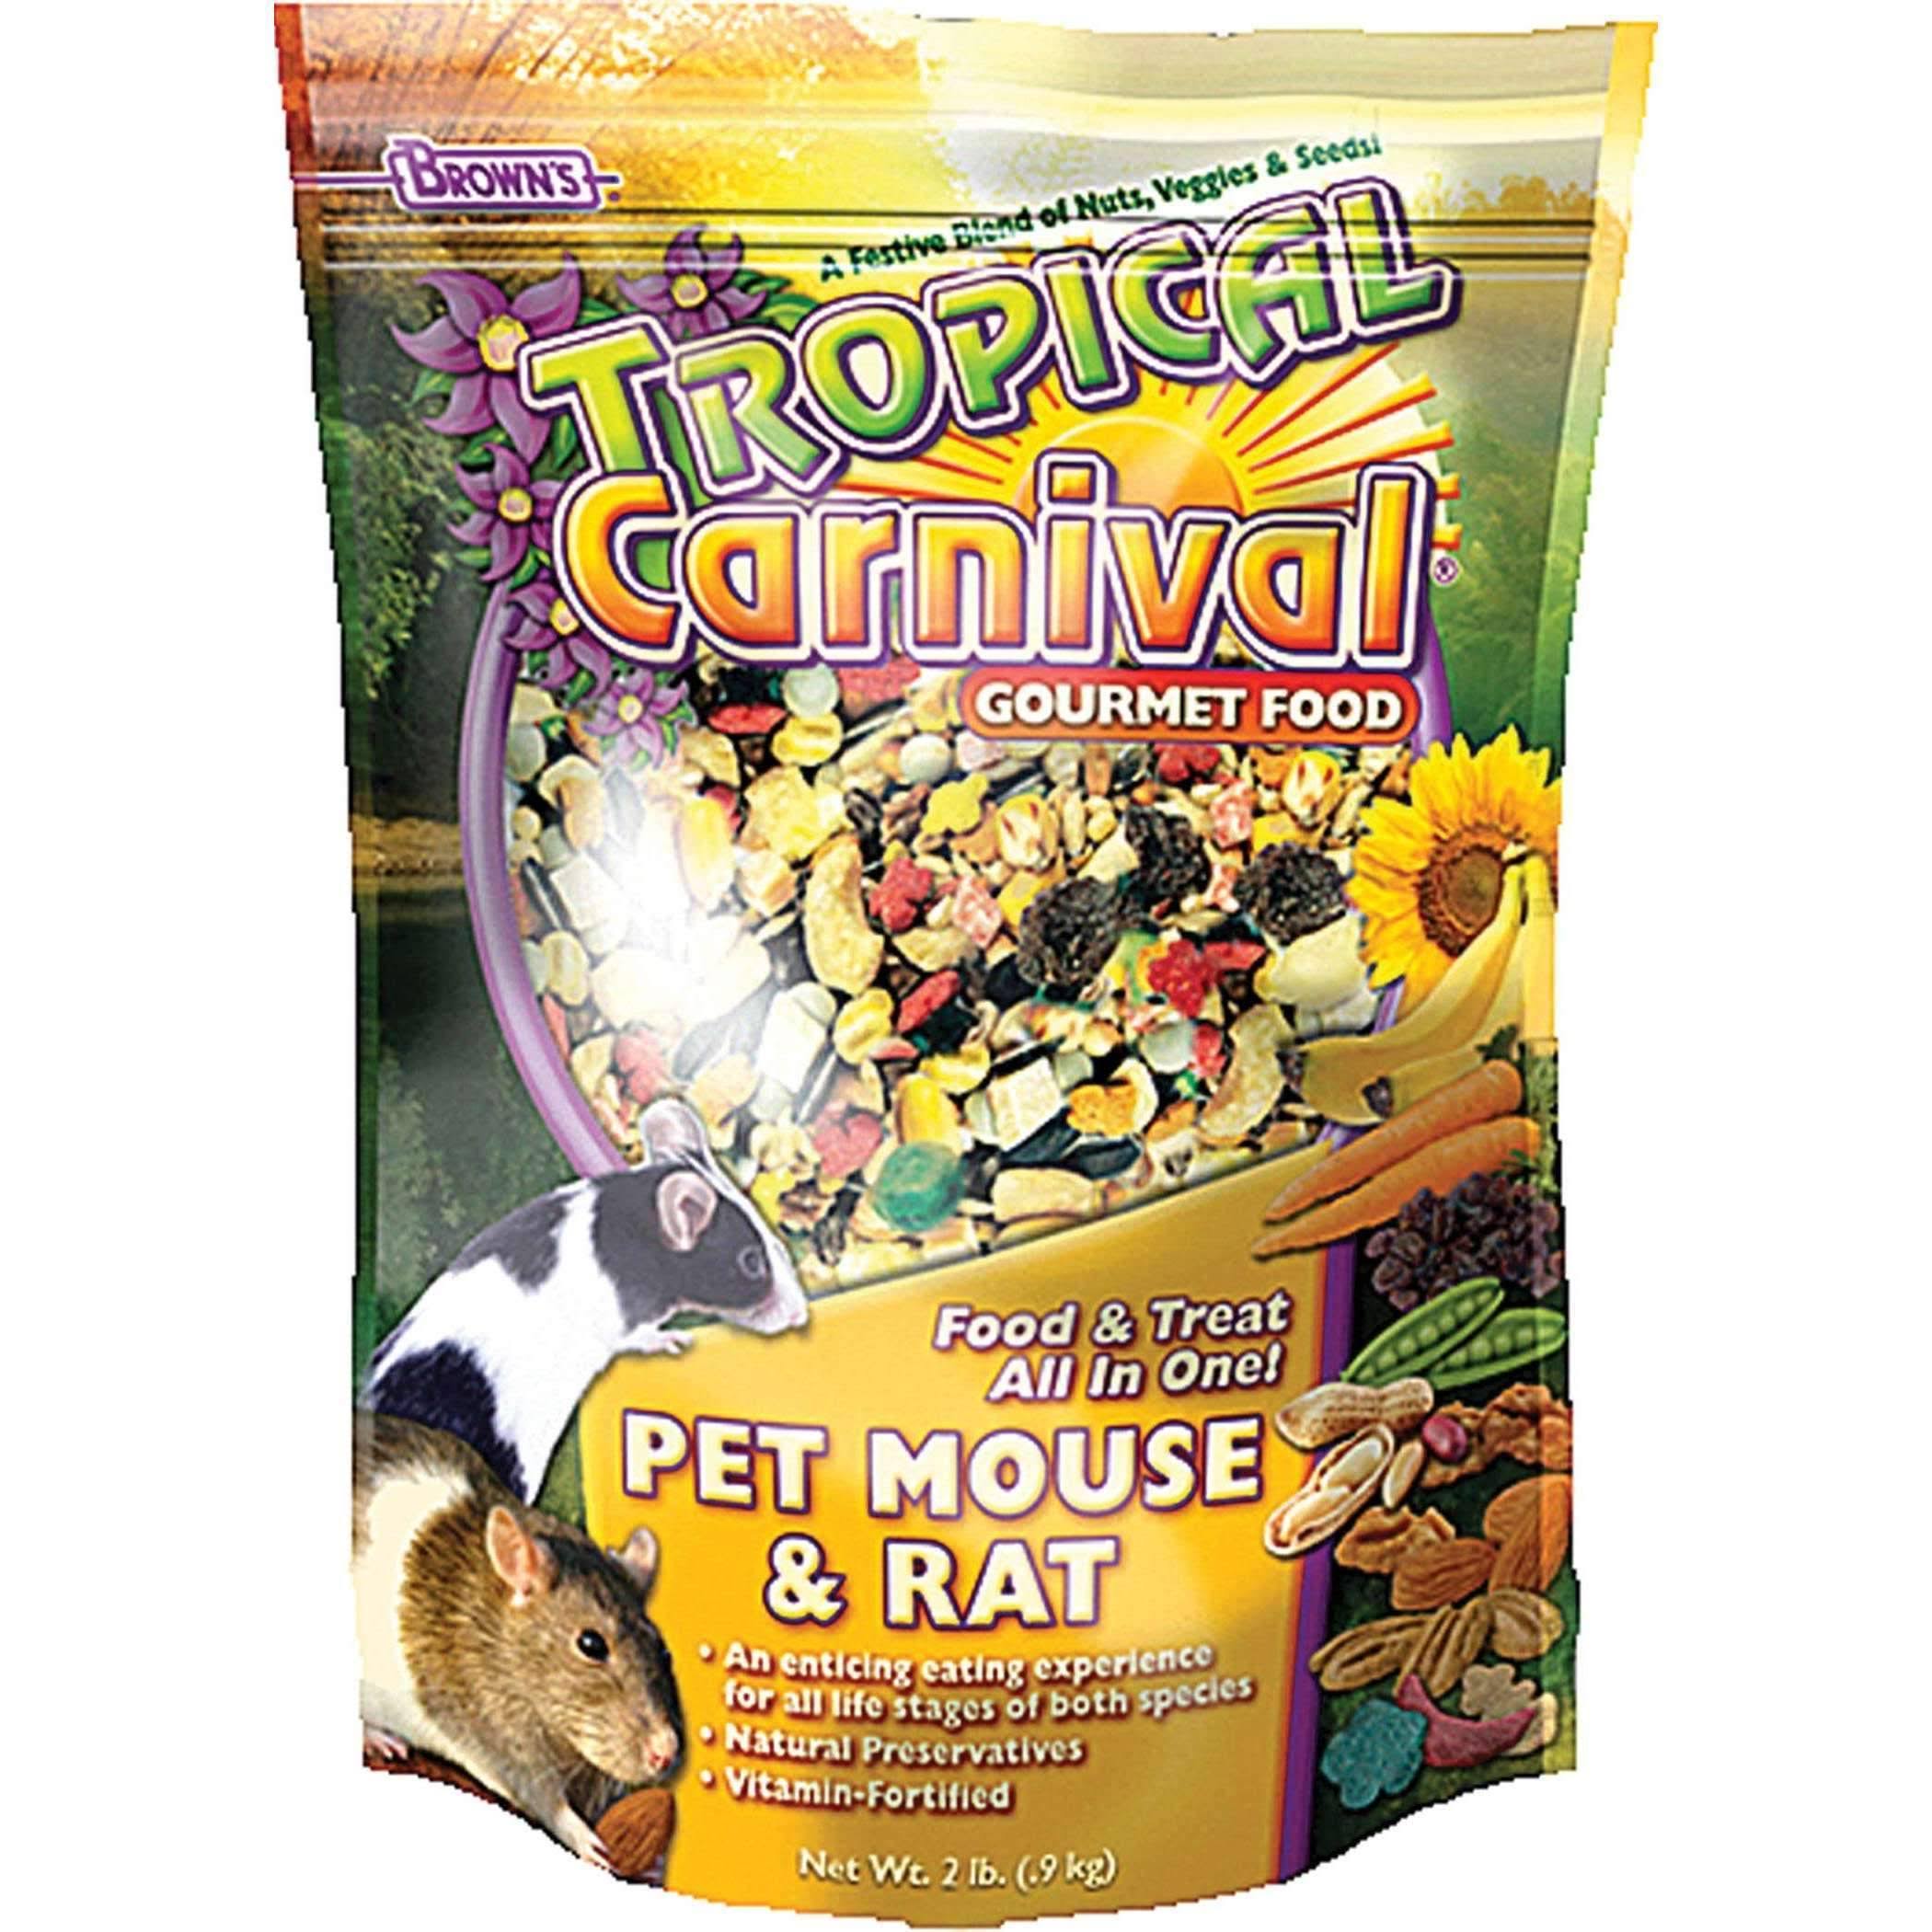 F.M. Brown's Tropical Carnival Mouse And Rat Food